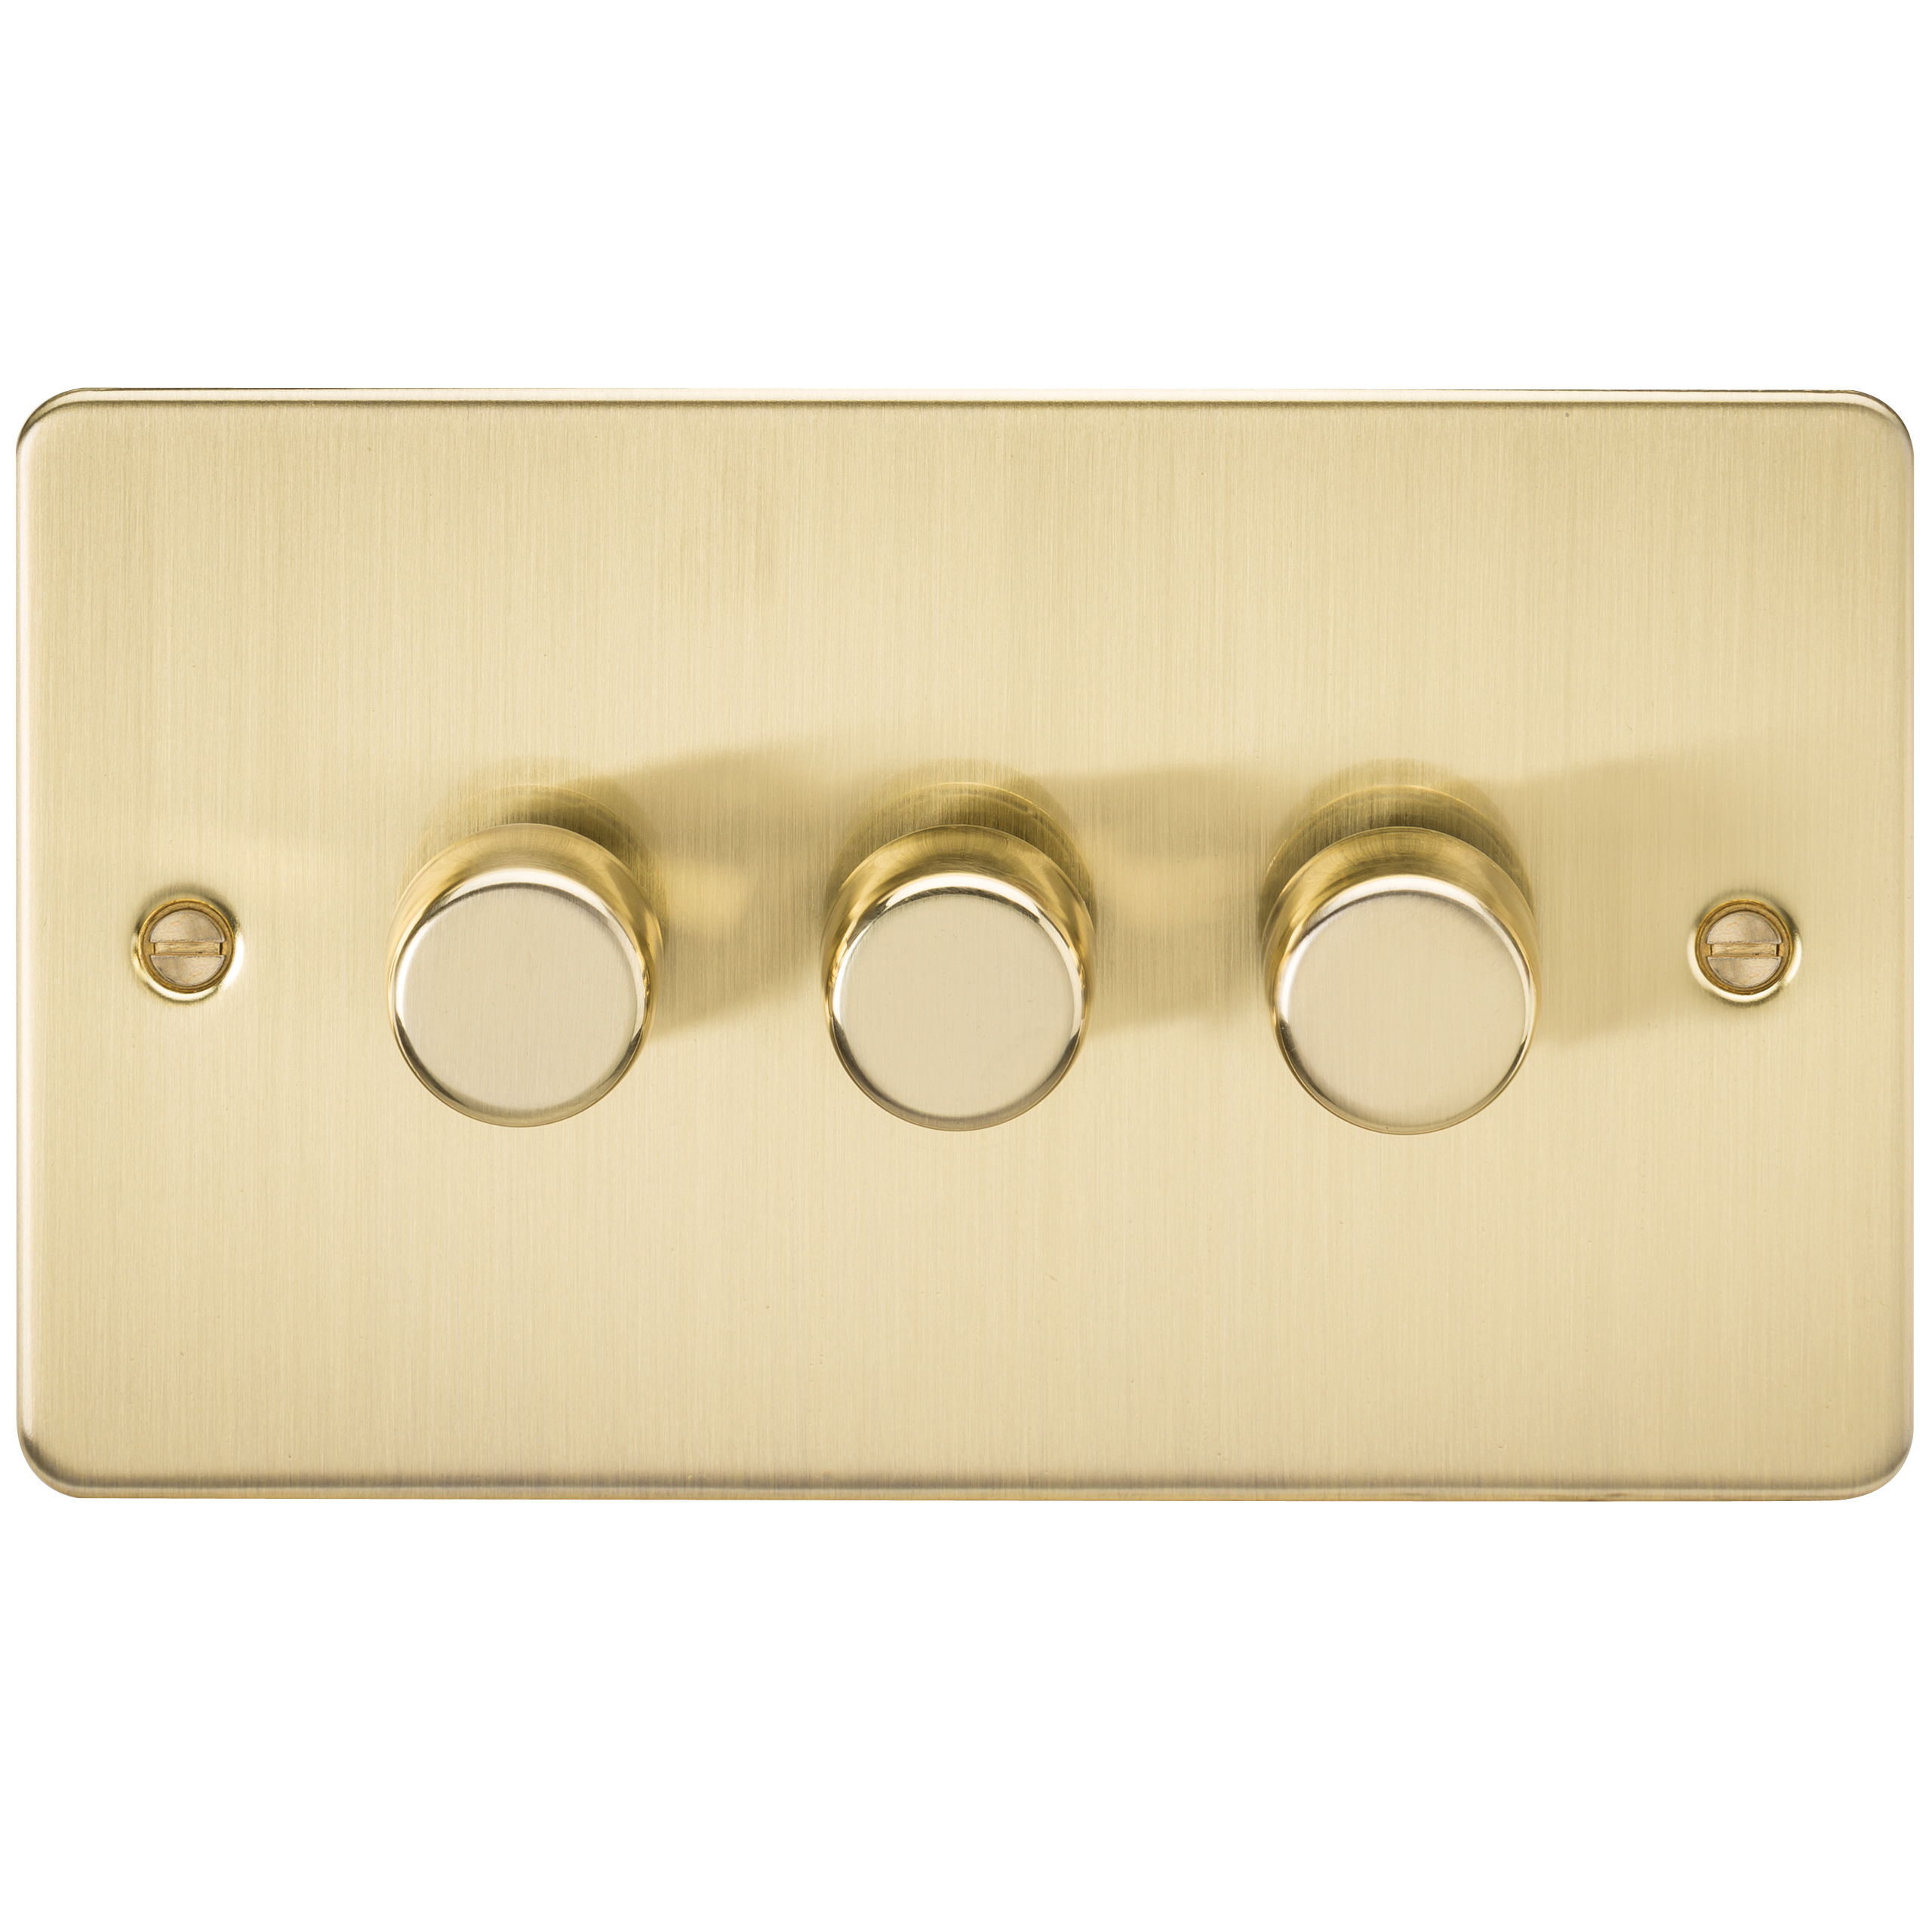 ML Accessories-FP2163BB Flat Plate 3G 2 Way Dimmer 60-400W - Brushed Brass